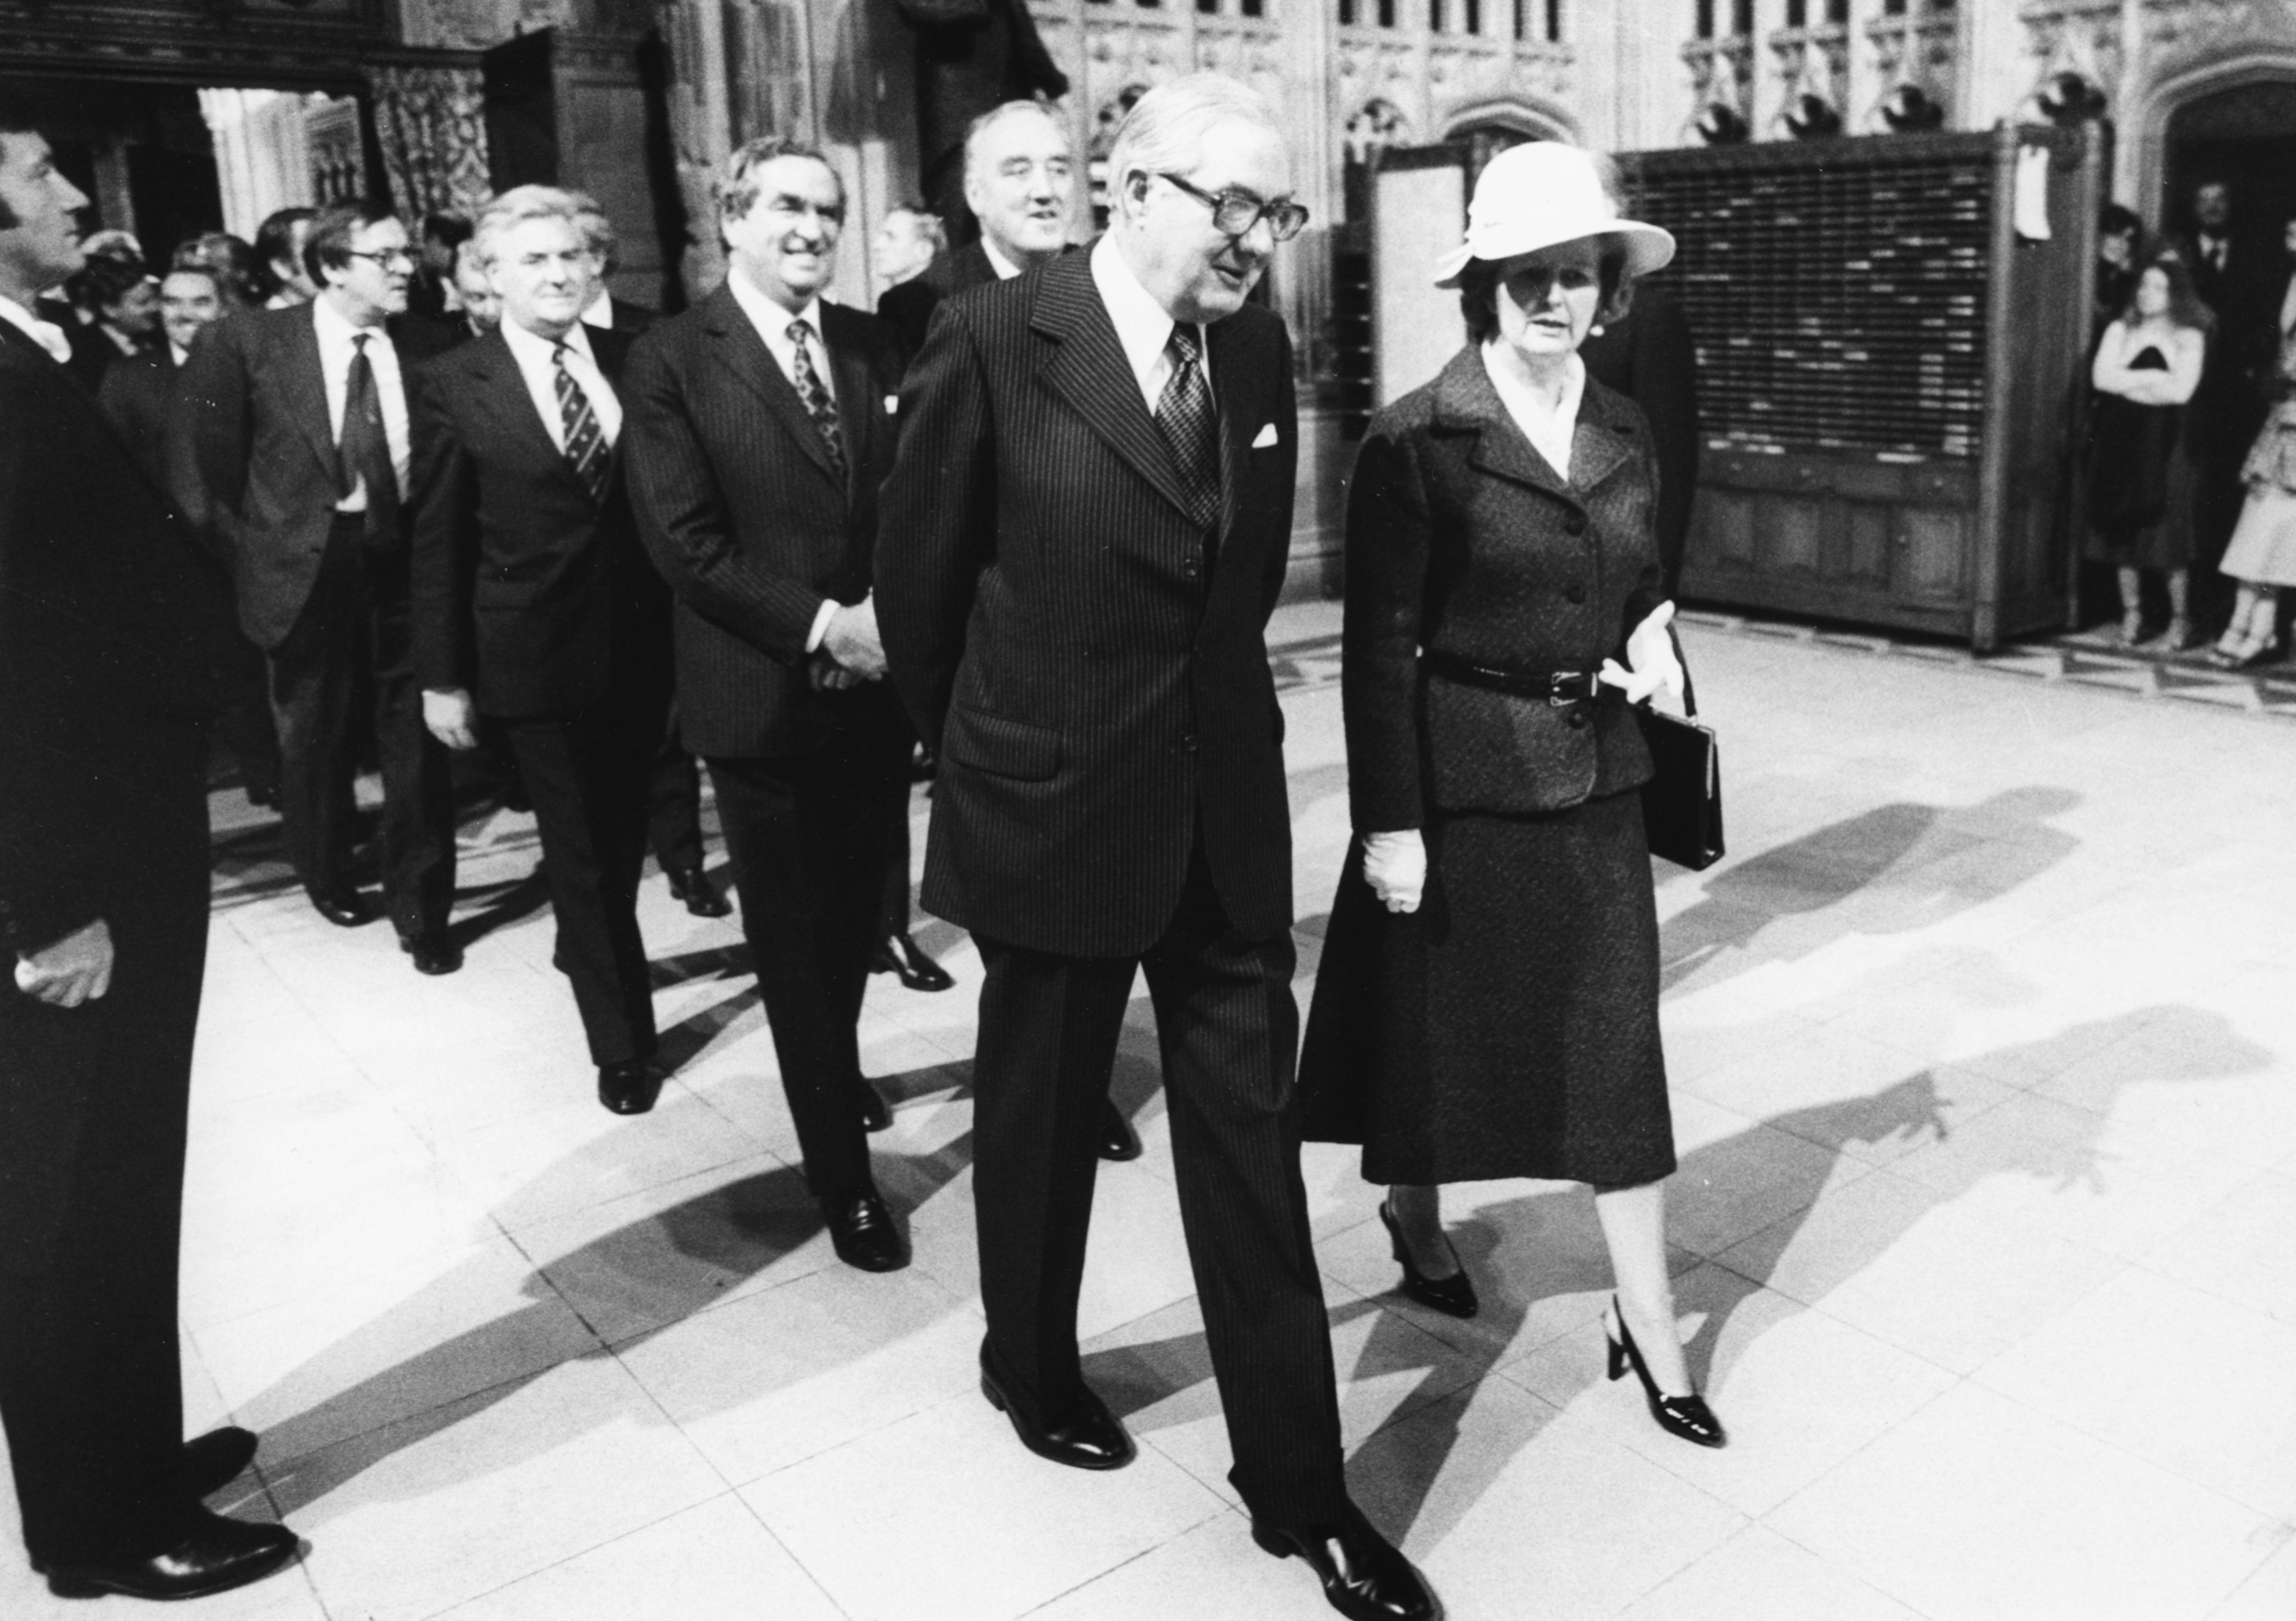 Prime Minister James Callaghan and Leader of the Opposition Margaret Thatcher, followed by Denis Healey and William Whitelaw, engaged in conversation as they leave the House of Commons, London, November 1st 1978. (Photo by Central Press/Hulton Archive/Getty Images)